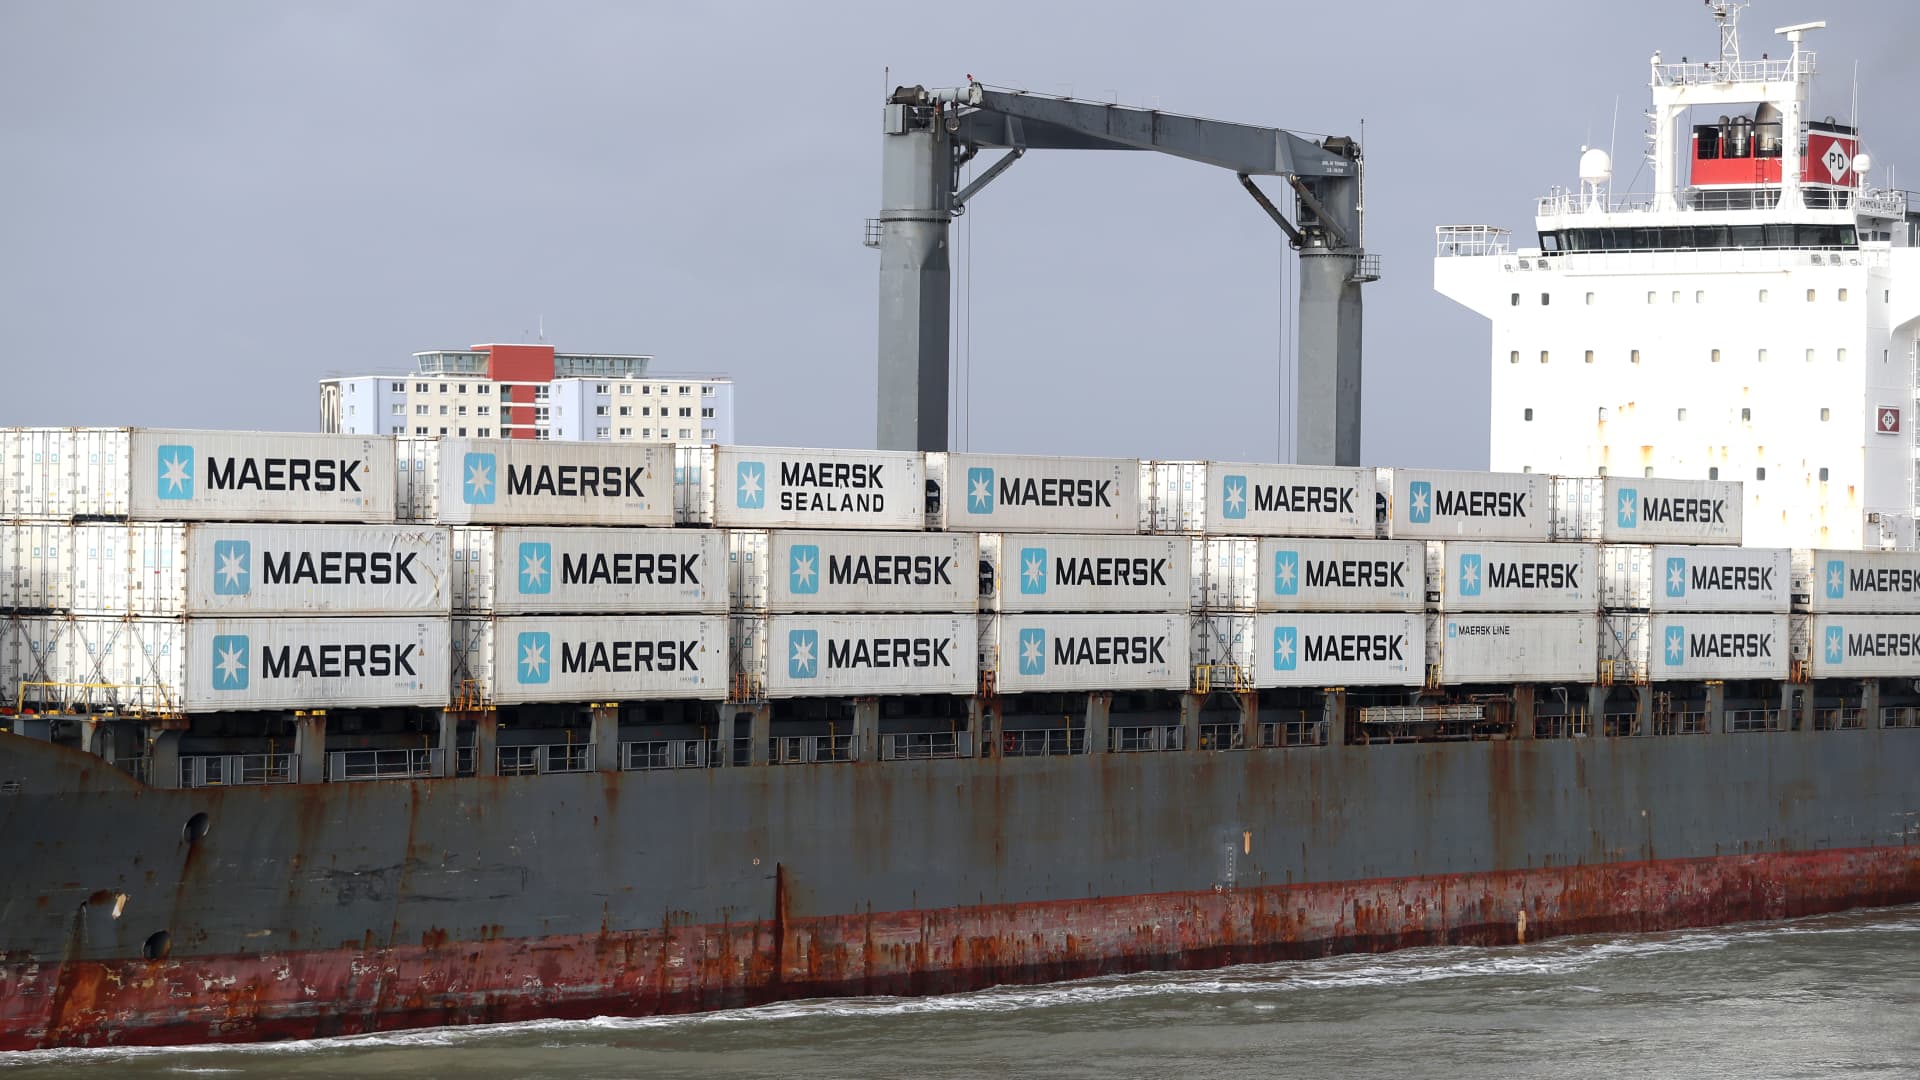 Worlds largest container shipping firm Maersk, a barometer for global trade, warns of 'dark clouds on the horizon'